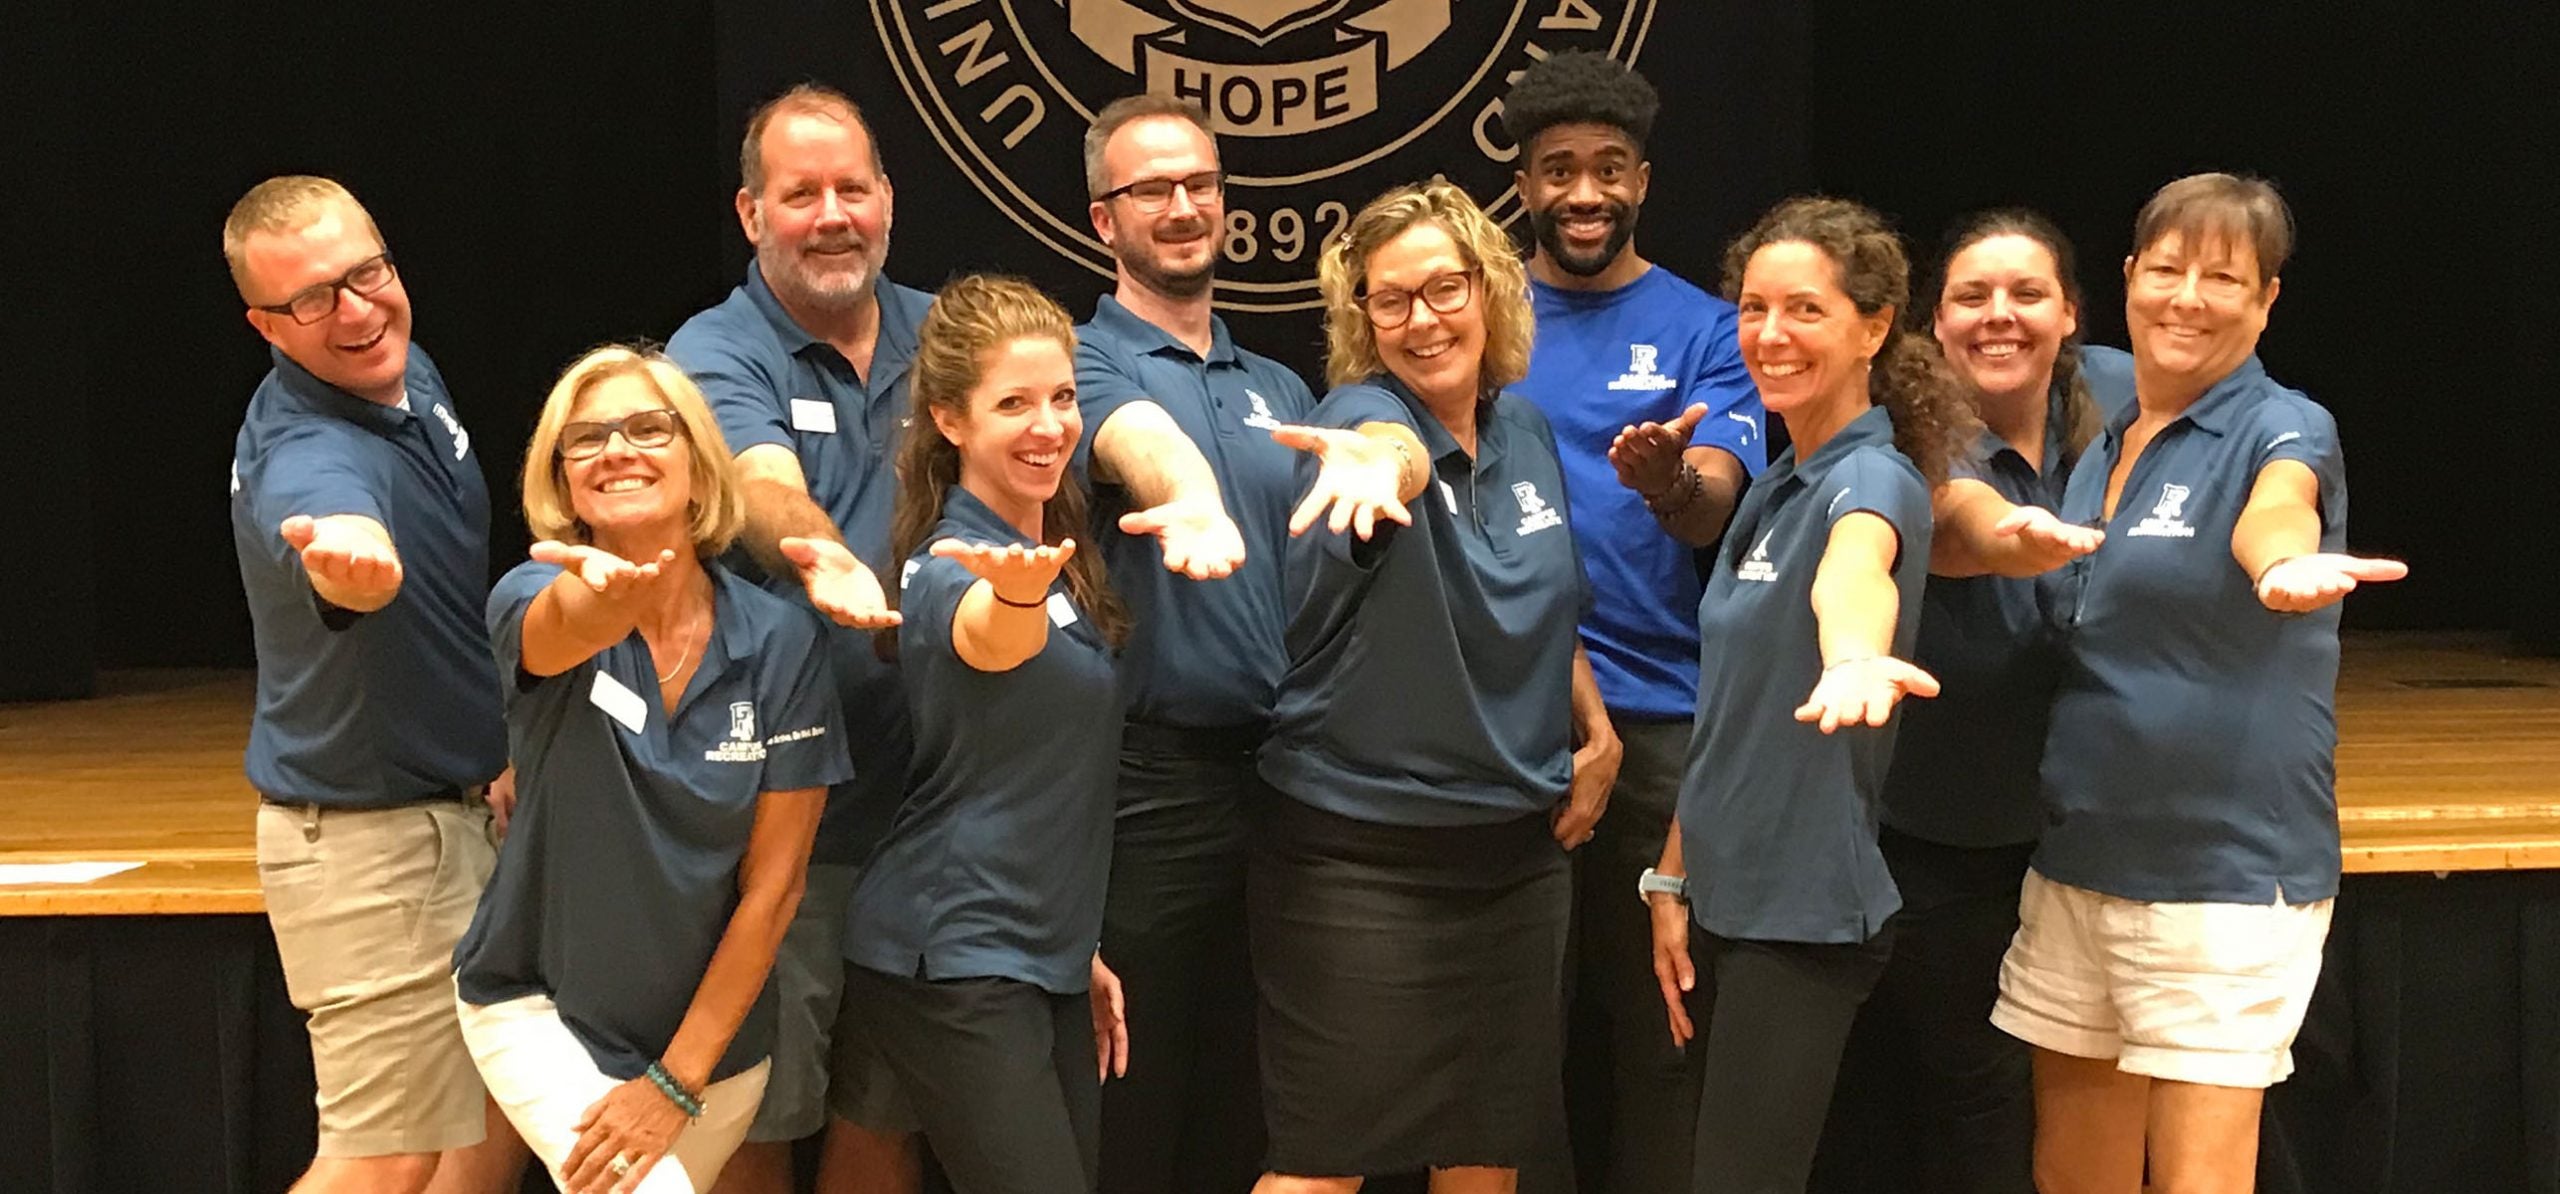 uri campus rec professional staff standing together with outstretched hands